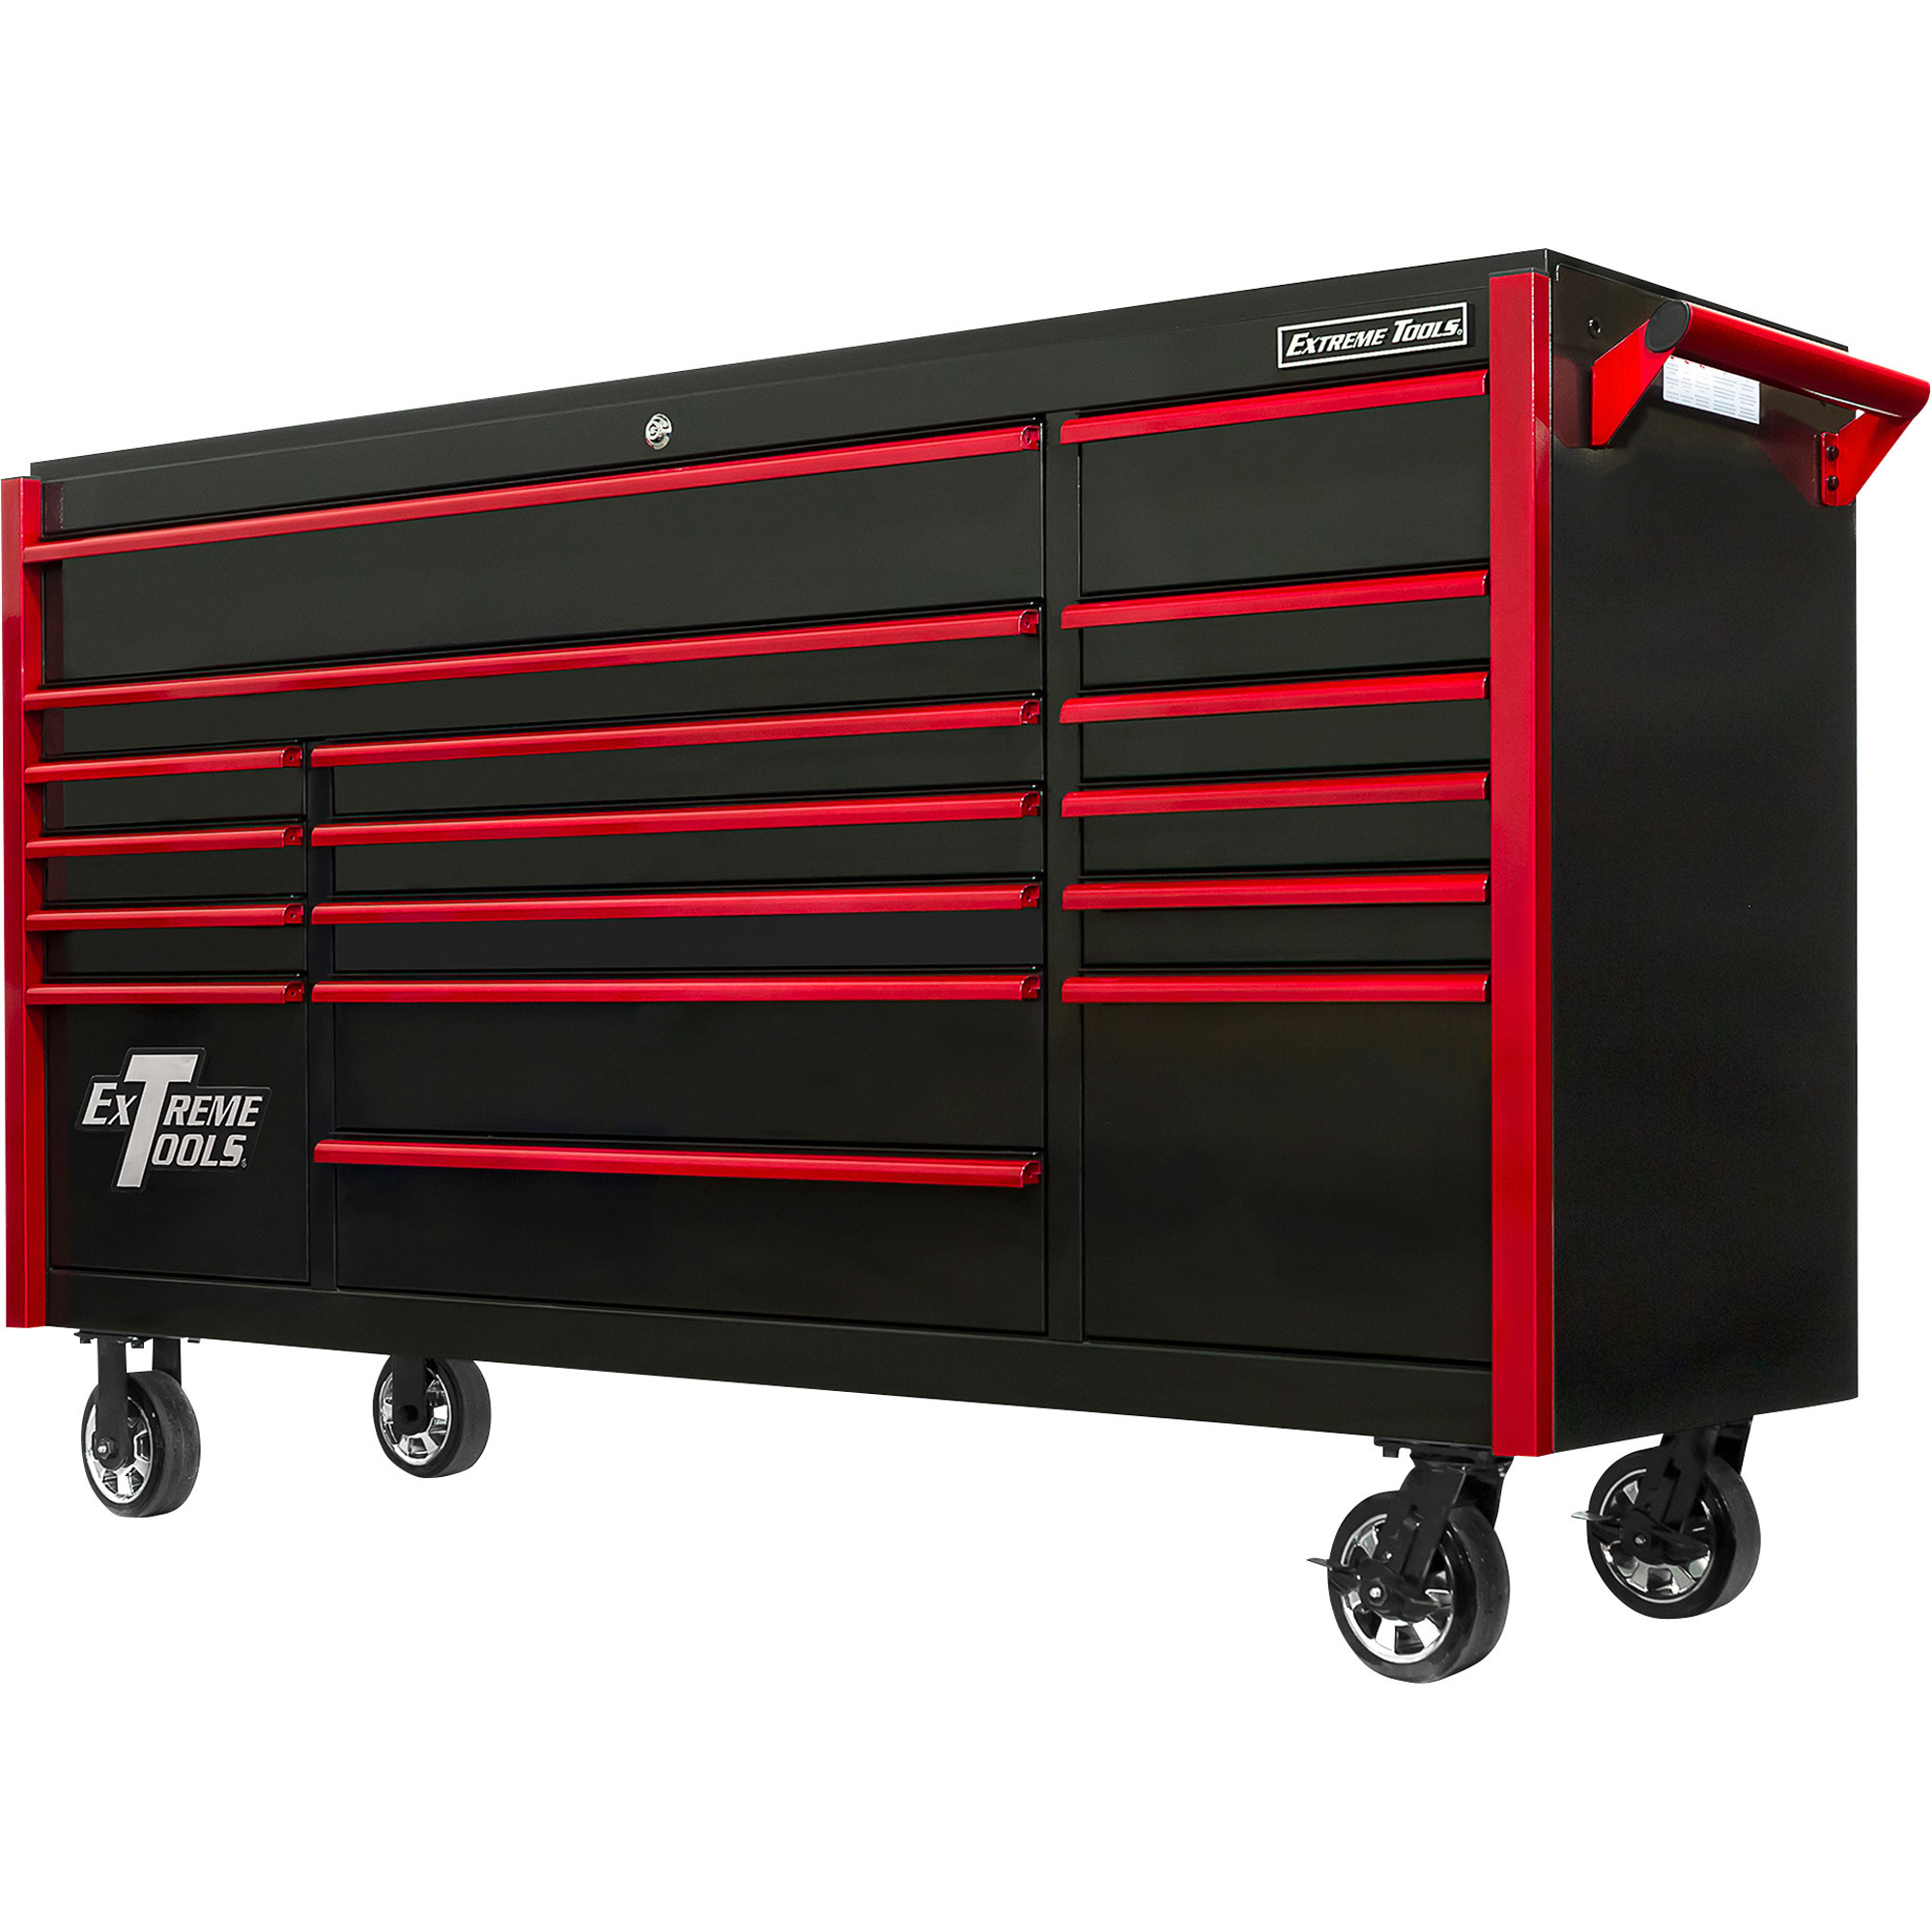 Extreme Tools DX Series 72Inch 17-Drawer Triple Bank Roller Cabinet â 72Inch W x 21Inch D x 42.7Inch H, Black/Red, Model DX722117RCBKRD